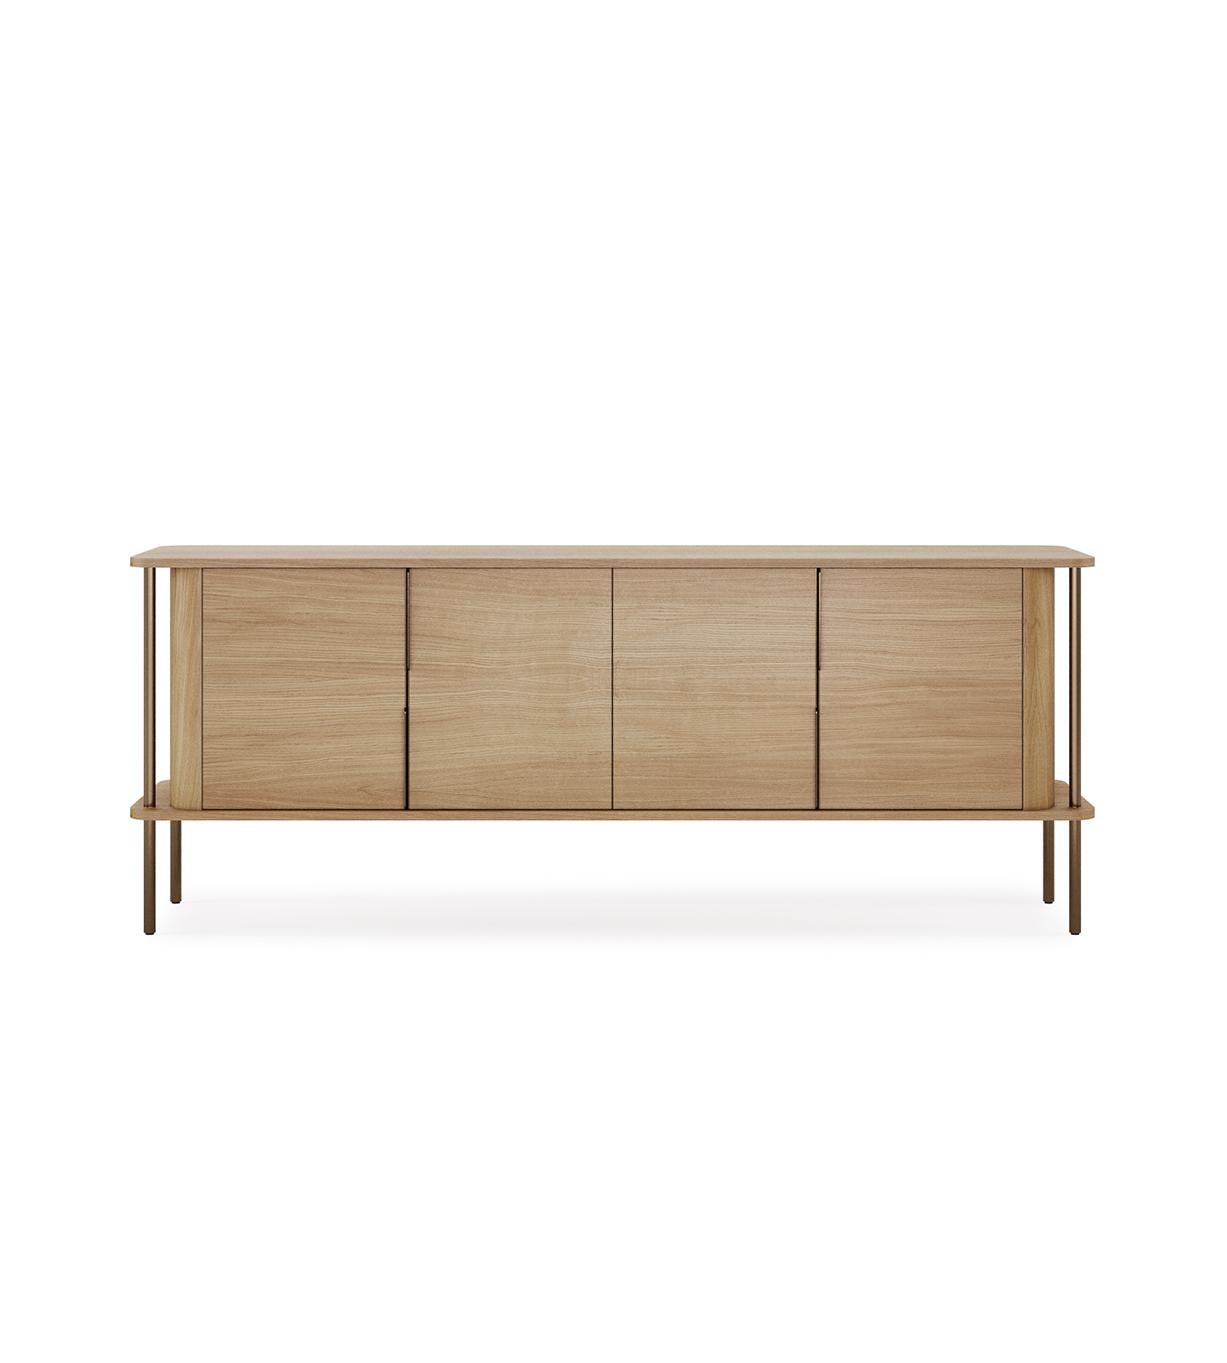 This contemporary sideboard is created with simplicity and longevity in mind. With four doors, perfect to accommodate your storage needs.